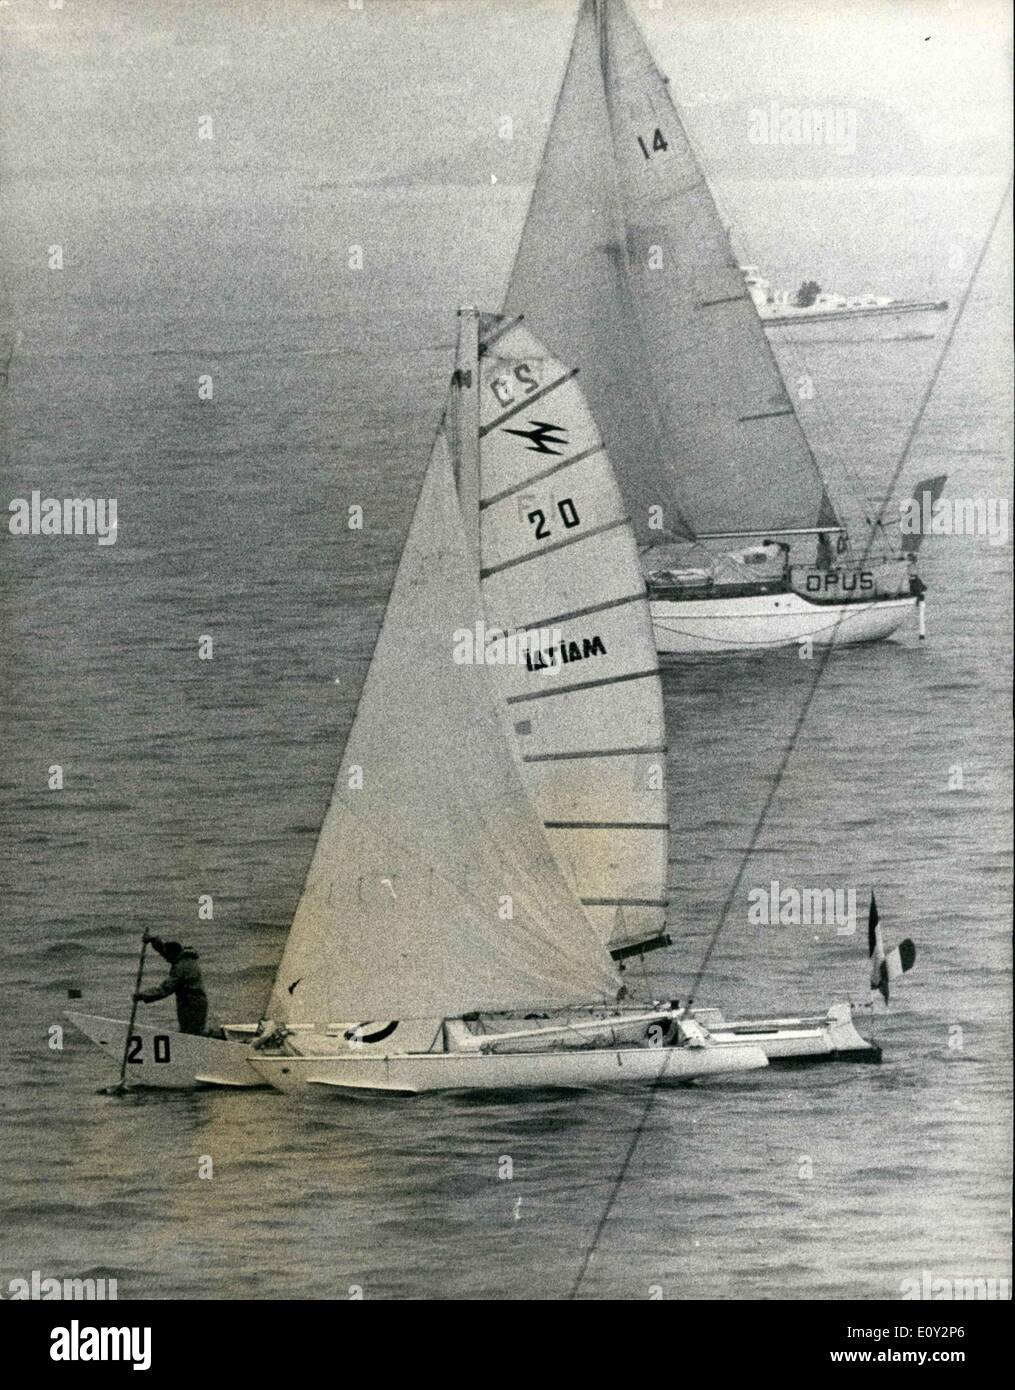 Jun. 06, 1968 - The Start of the Single Handed Translating Yacht race from Plymouth. 35 Yacht set out from Plymouth yesterday on the 3,000 mile single handed race across the Atlantic to Newport , Rhode Island . The race started in almost flat Calm and pouring rain. Photo shows Comndt. B.Waquet (France) tries to get his Sloop (Tri) ''Tamoure'' moving by using a 'Sweep' soon after the start. In the background is the sloop ''OPUS'', U.K. crewed by bank manager B.T.A Cooke. Stock Photo